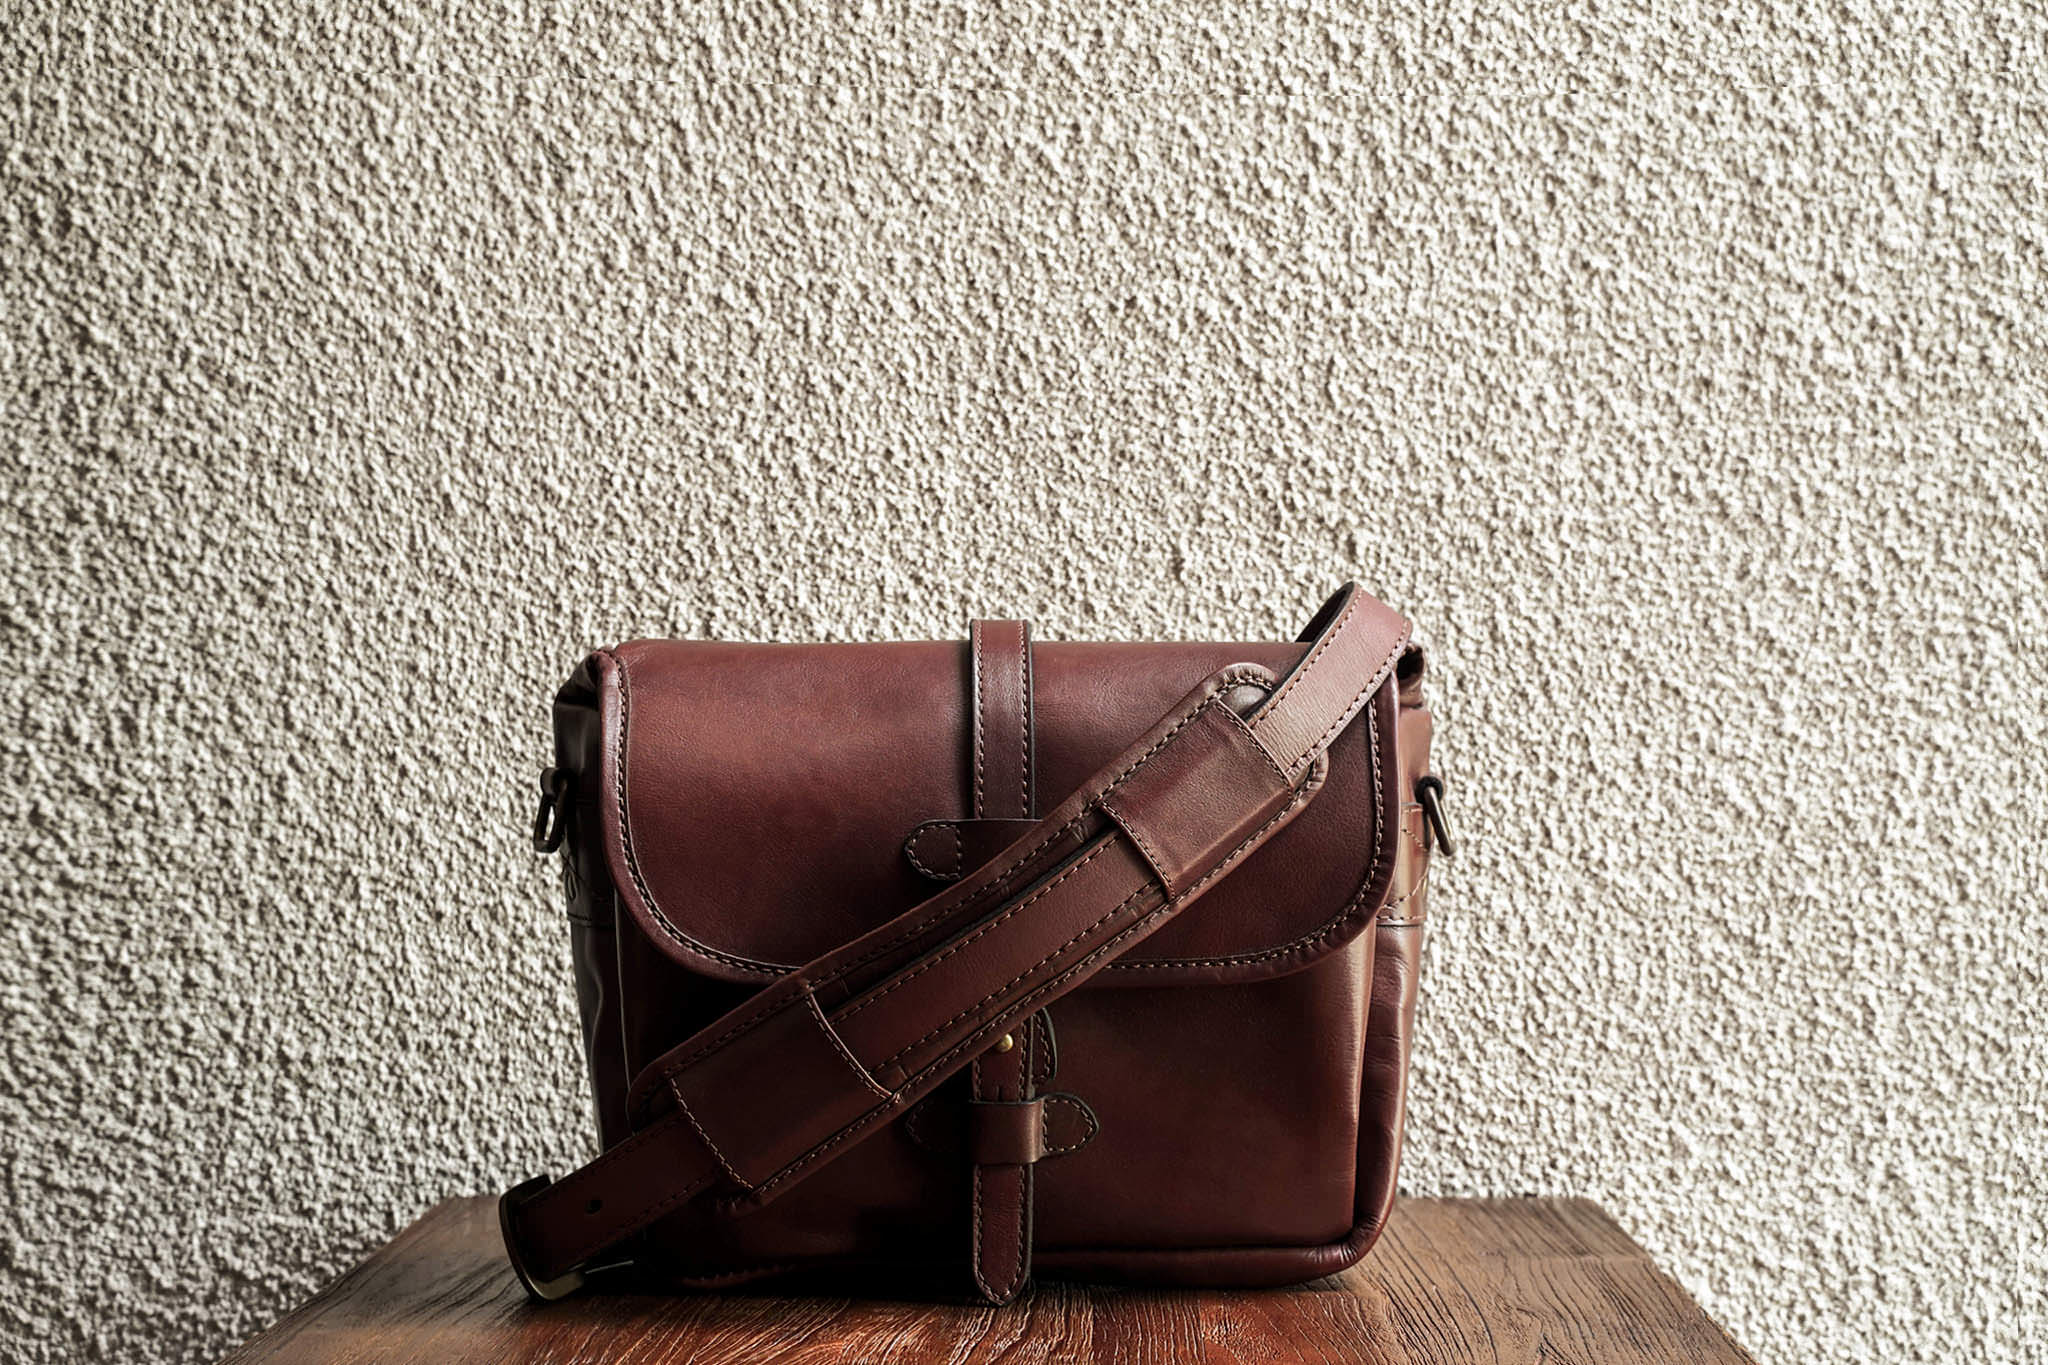 Items Leather Camera Bag